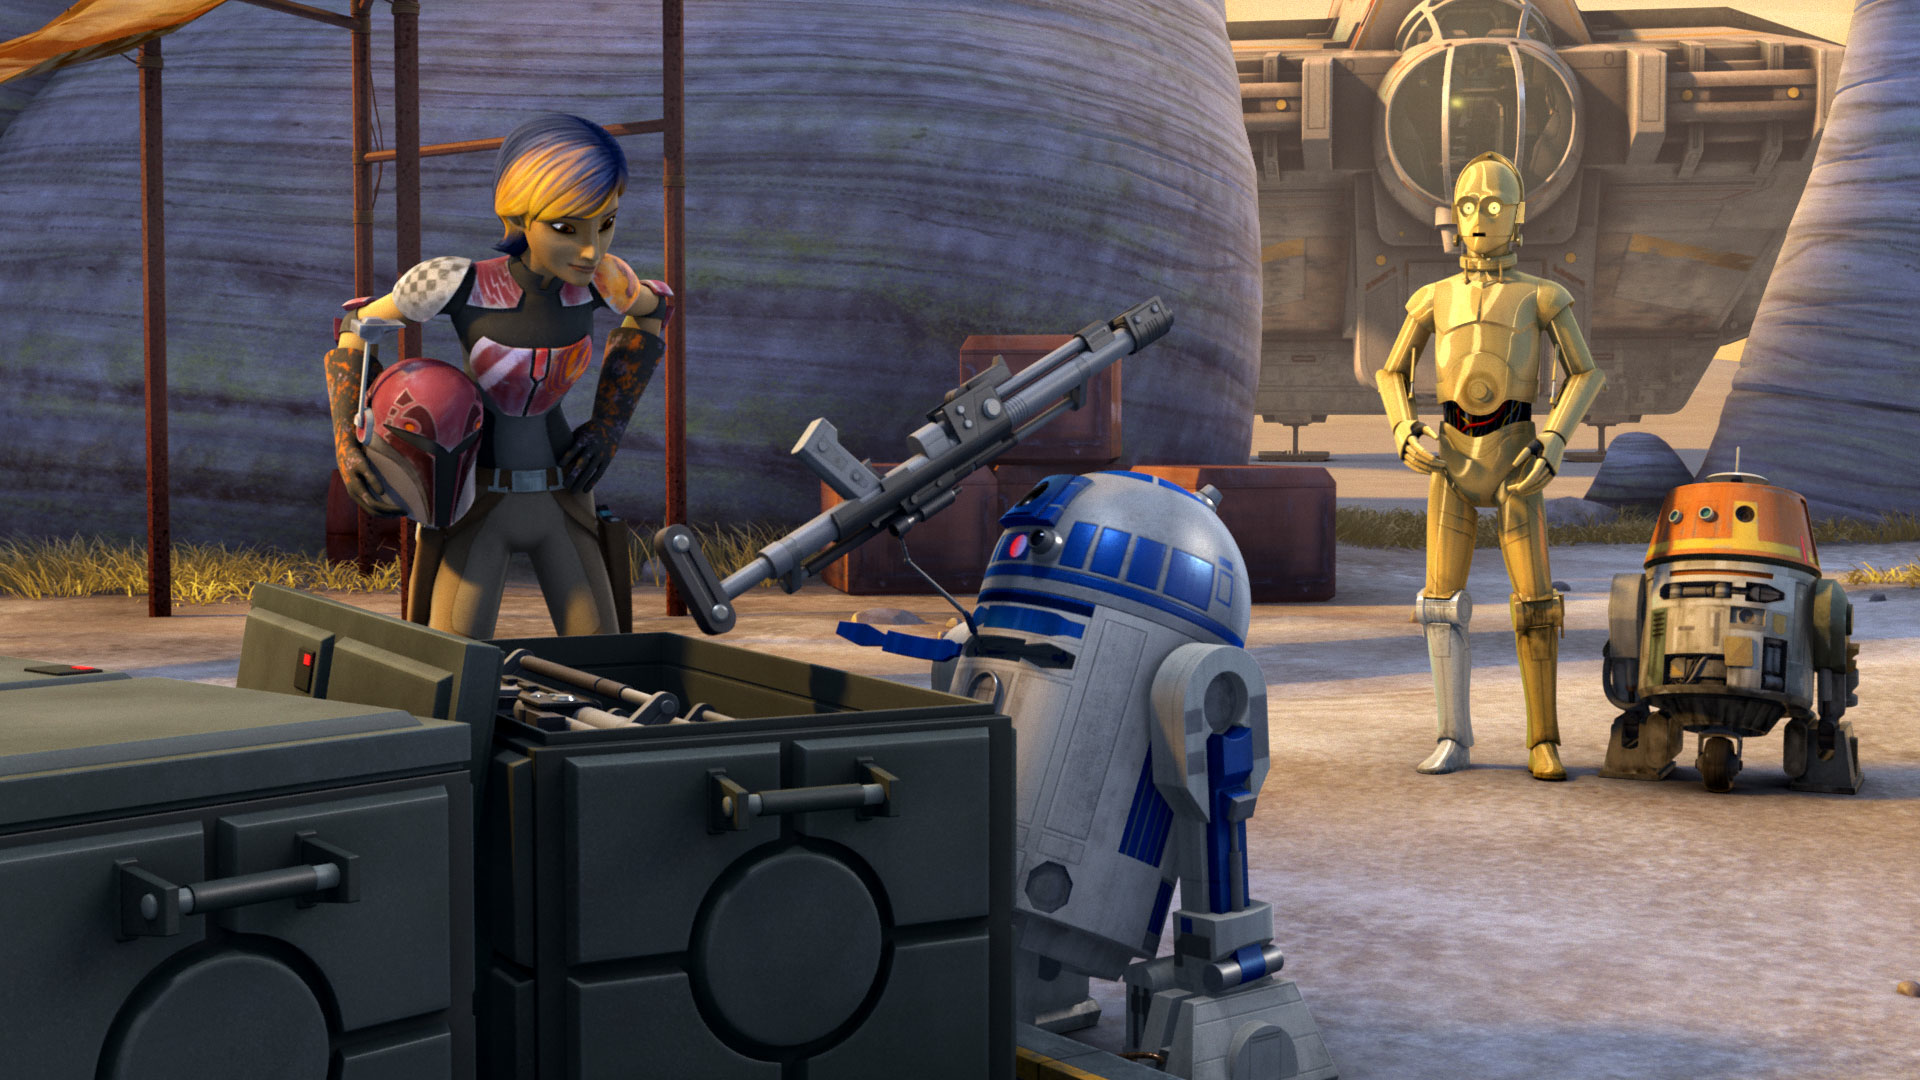 Image result for star wars rebels droids in distress